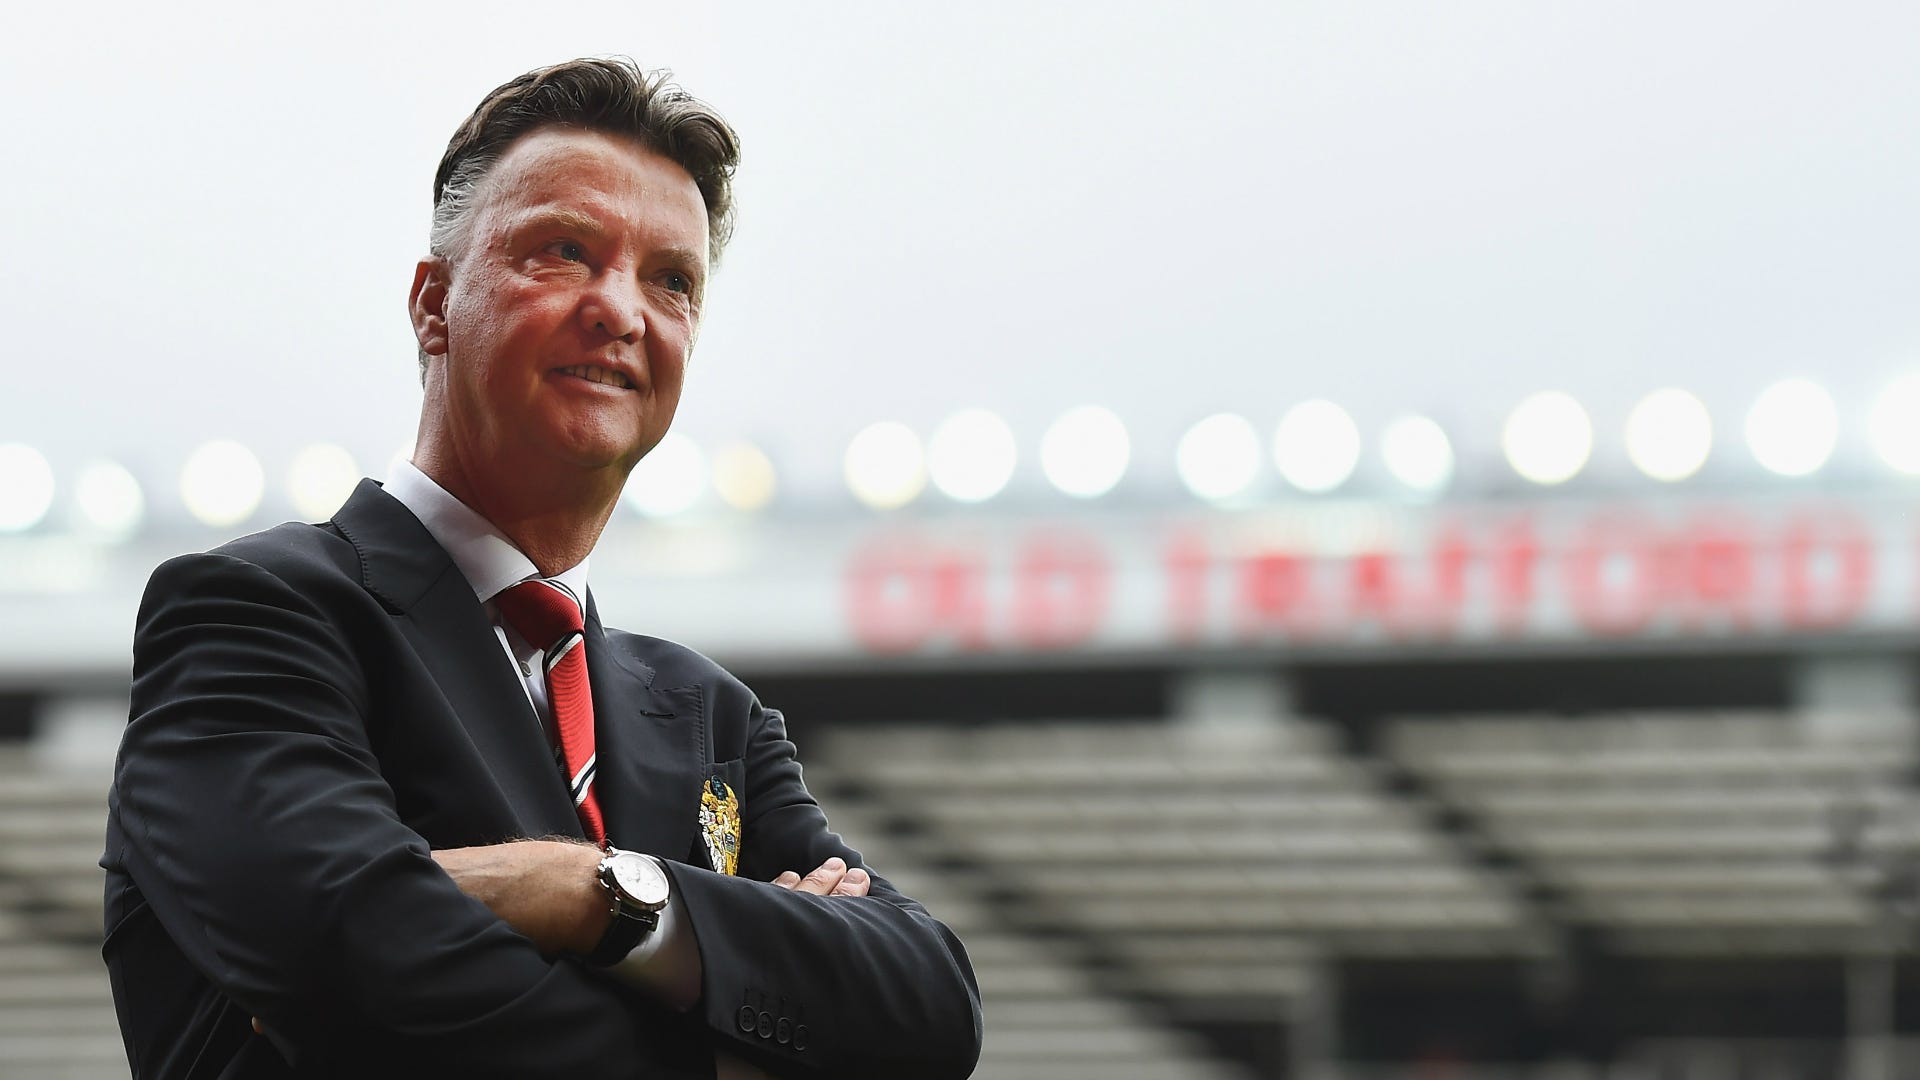 GALLERY: Louis van Gaal's first year at Manchester United | Goal.com